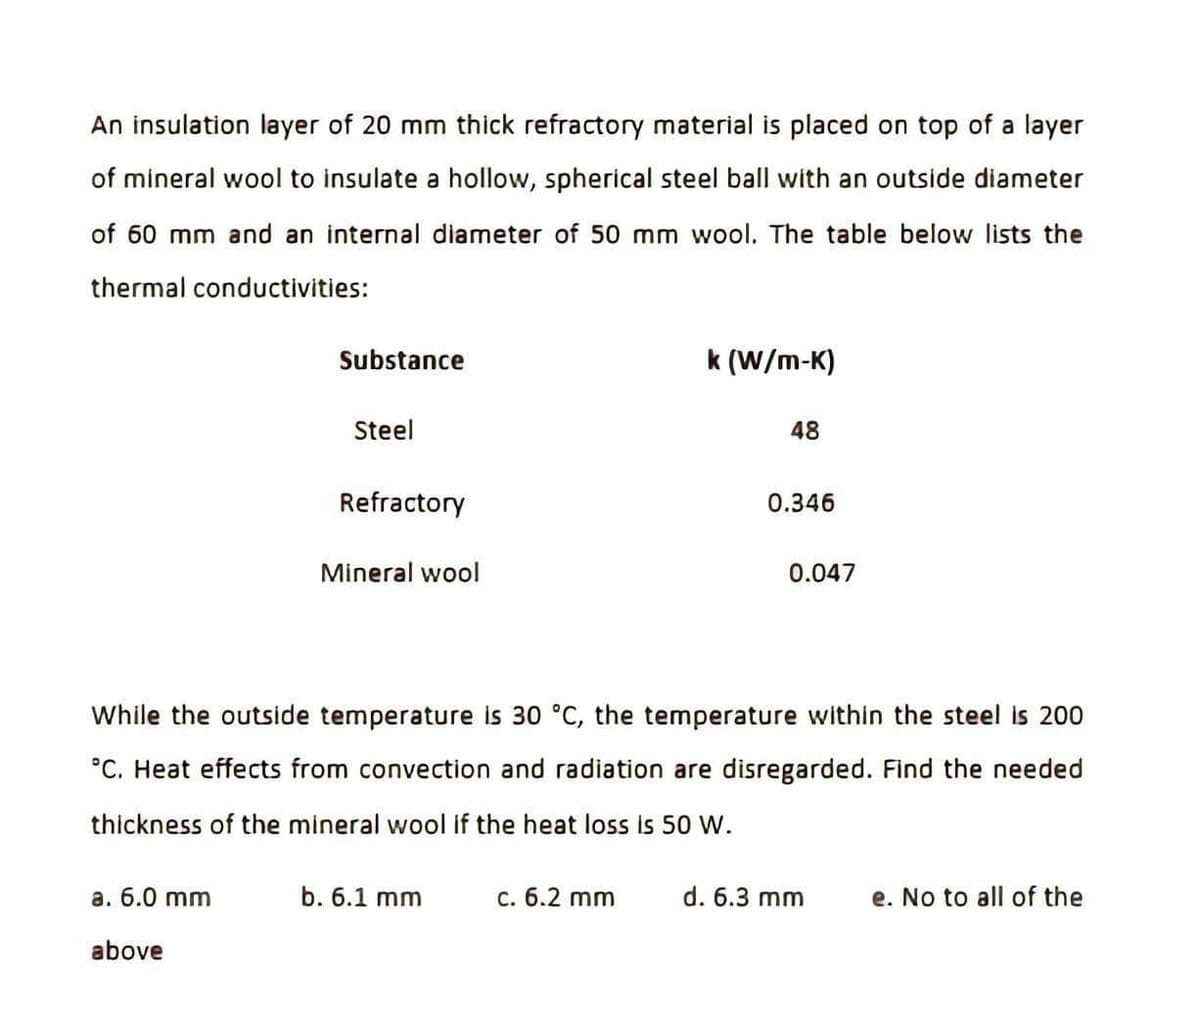 An insulation layer of 20 mm thick refractory material is placed on top of a layer
of mineral wool to insulate a hollow, spherical steel ball with an outside diameter
of 60 mm and an internal diameter of 50 mm wool. The table below lists the
thermal conductivities:
Substance
a. 6.0 mm
above
Steel
Refractory
Mineral wool
b. 6.1 mm
k (W/m-K)
c. 6.2 mm
48
While the outside temperature is 30 °C, the temperature within the steel is 200
°C. Heat effects from convection and radiation are disregarded. Find the needed
thickness of the mineral wool if the heat loss is 50 W.
0.346
0.047
d. 6.3 mm
e. No to all of the